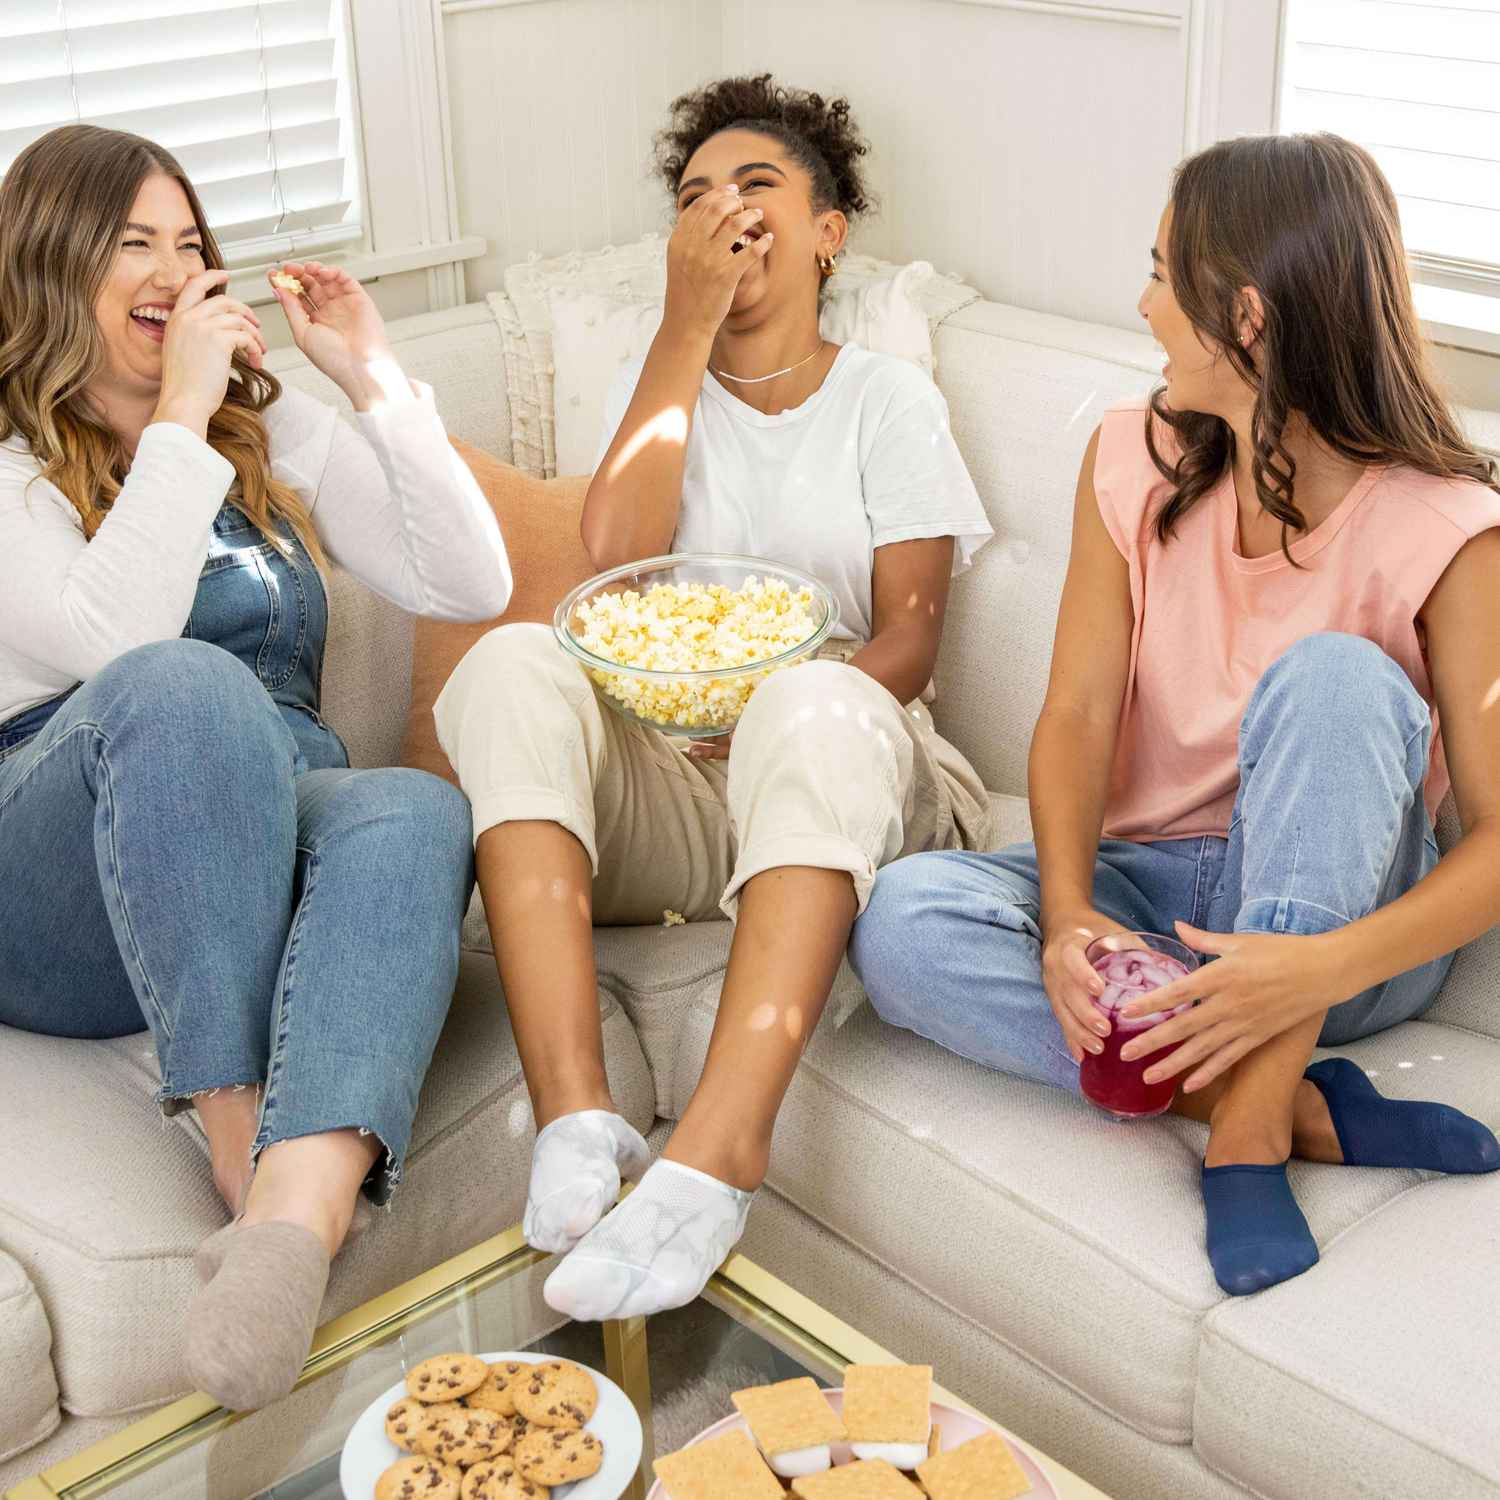 Three women are sitting on the couch laughing and eating popcorn while wearing GOLDTOE™ socks.